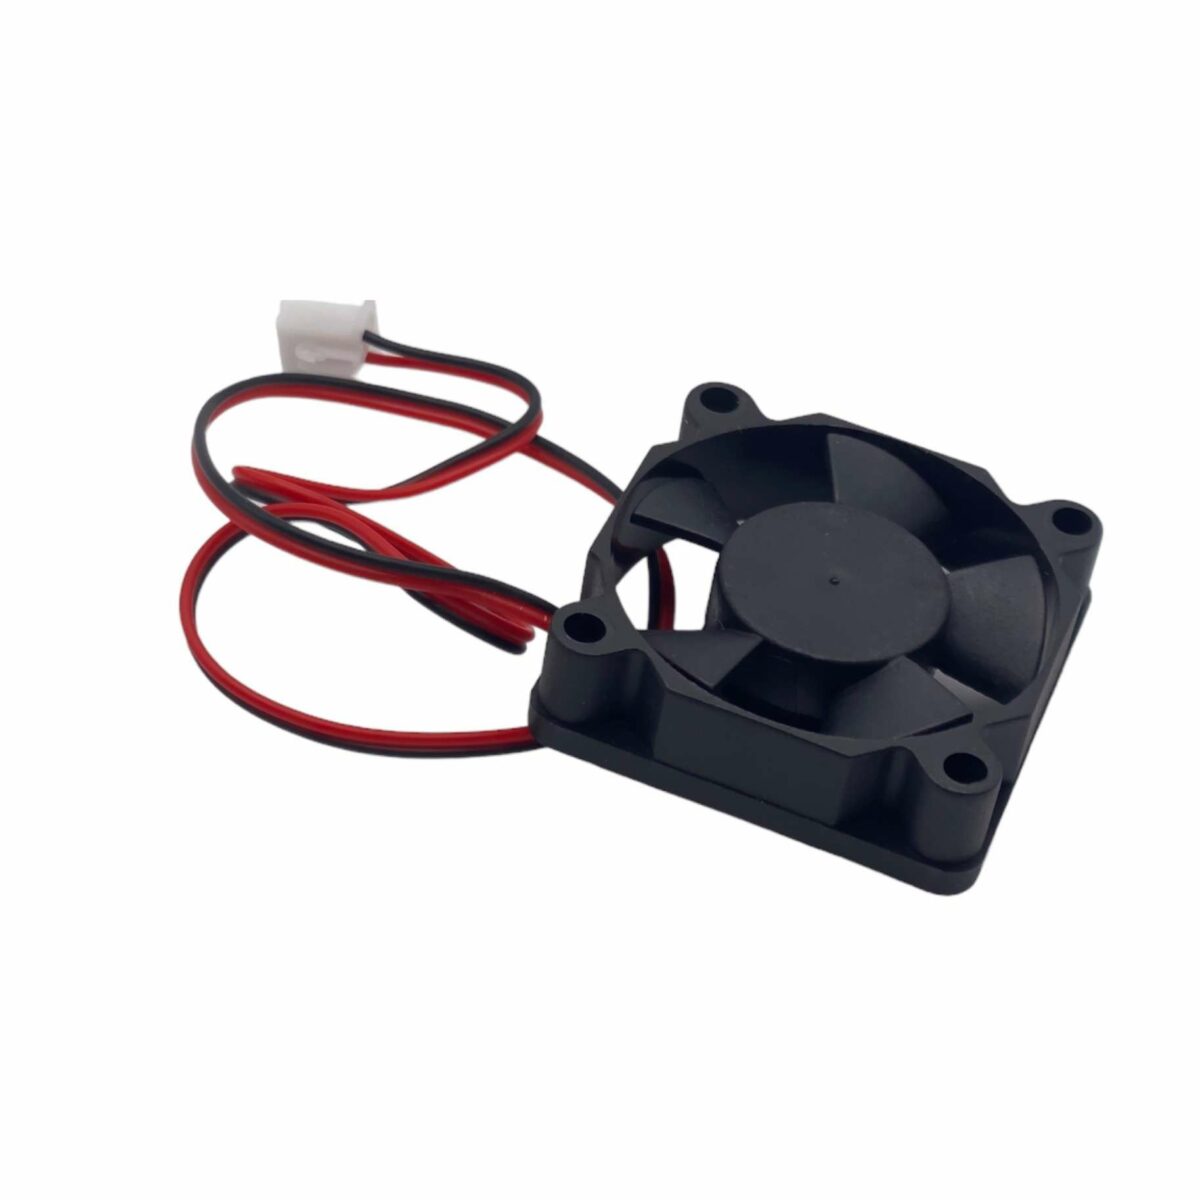 TiVo Roamio Replacement Cooling Fan